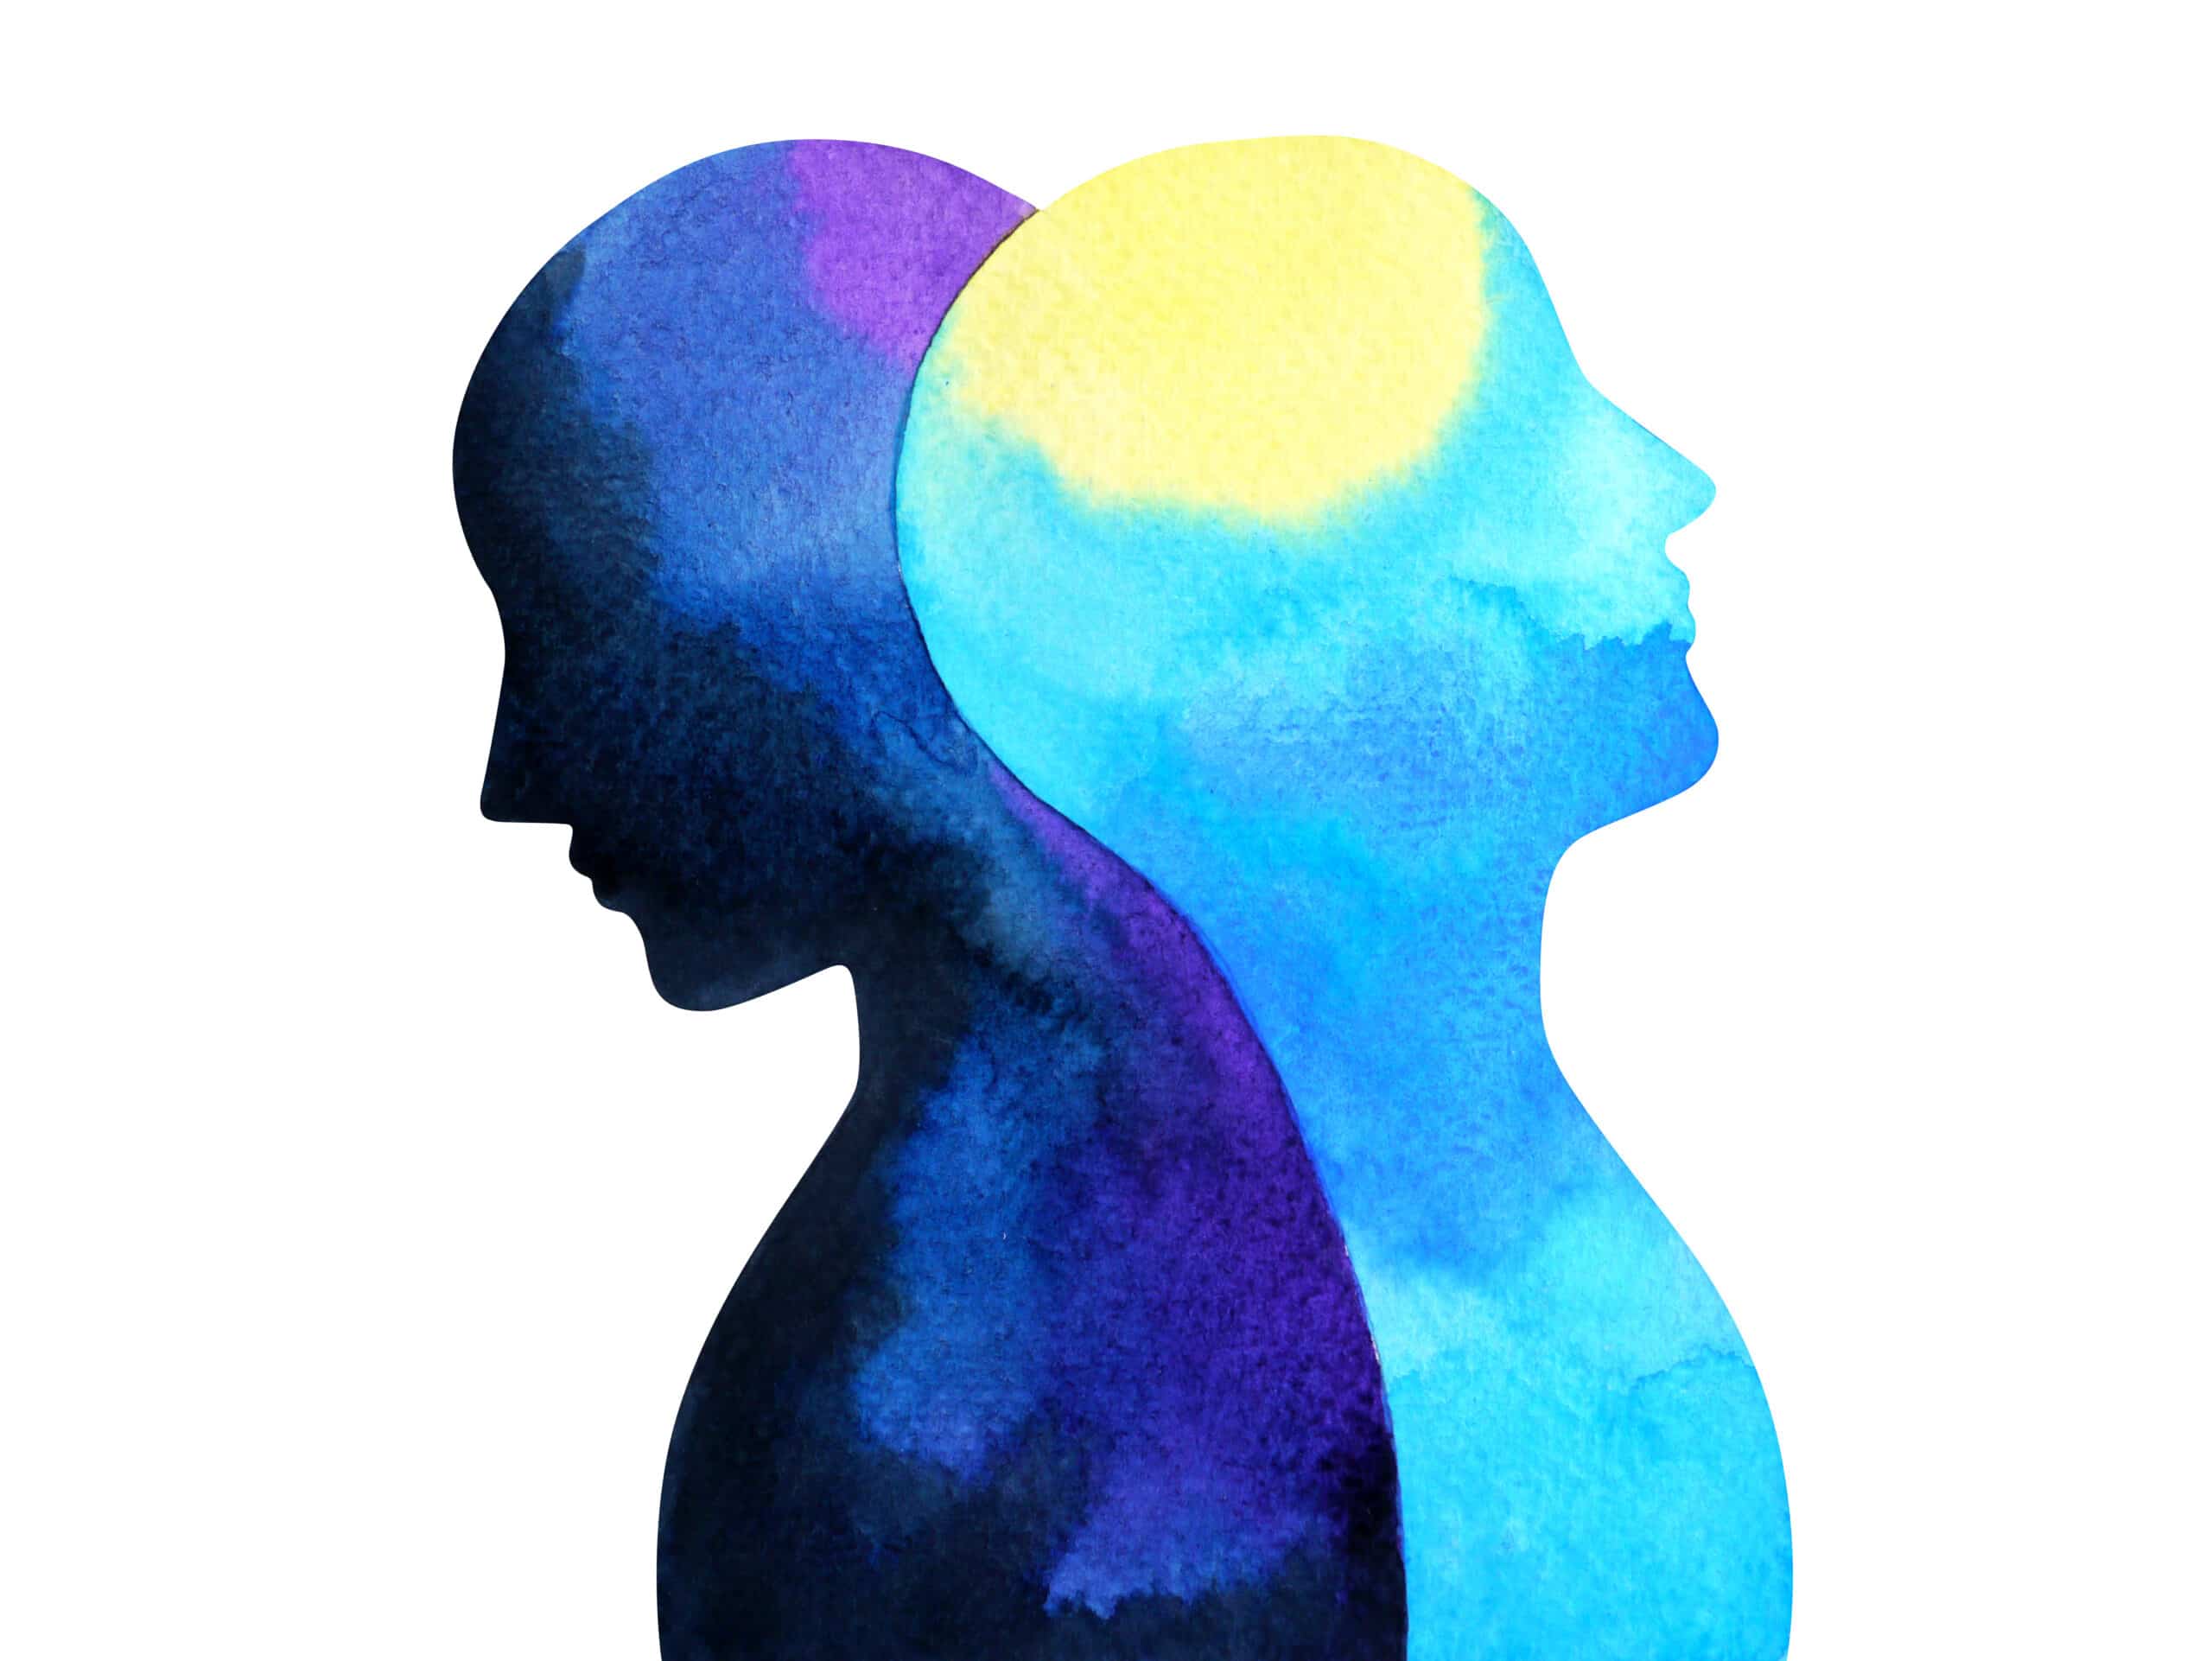 An illustration of two people, their heads and shoulders intertwined, from the side. They are drawn in purple, blue and yellow watercolours.